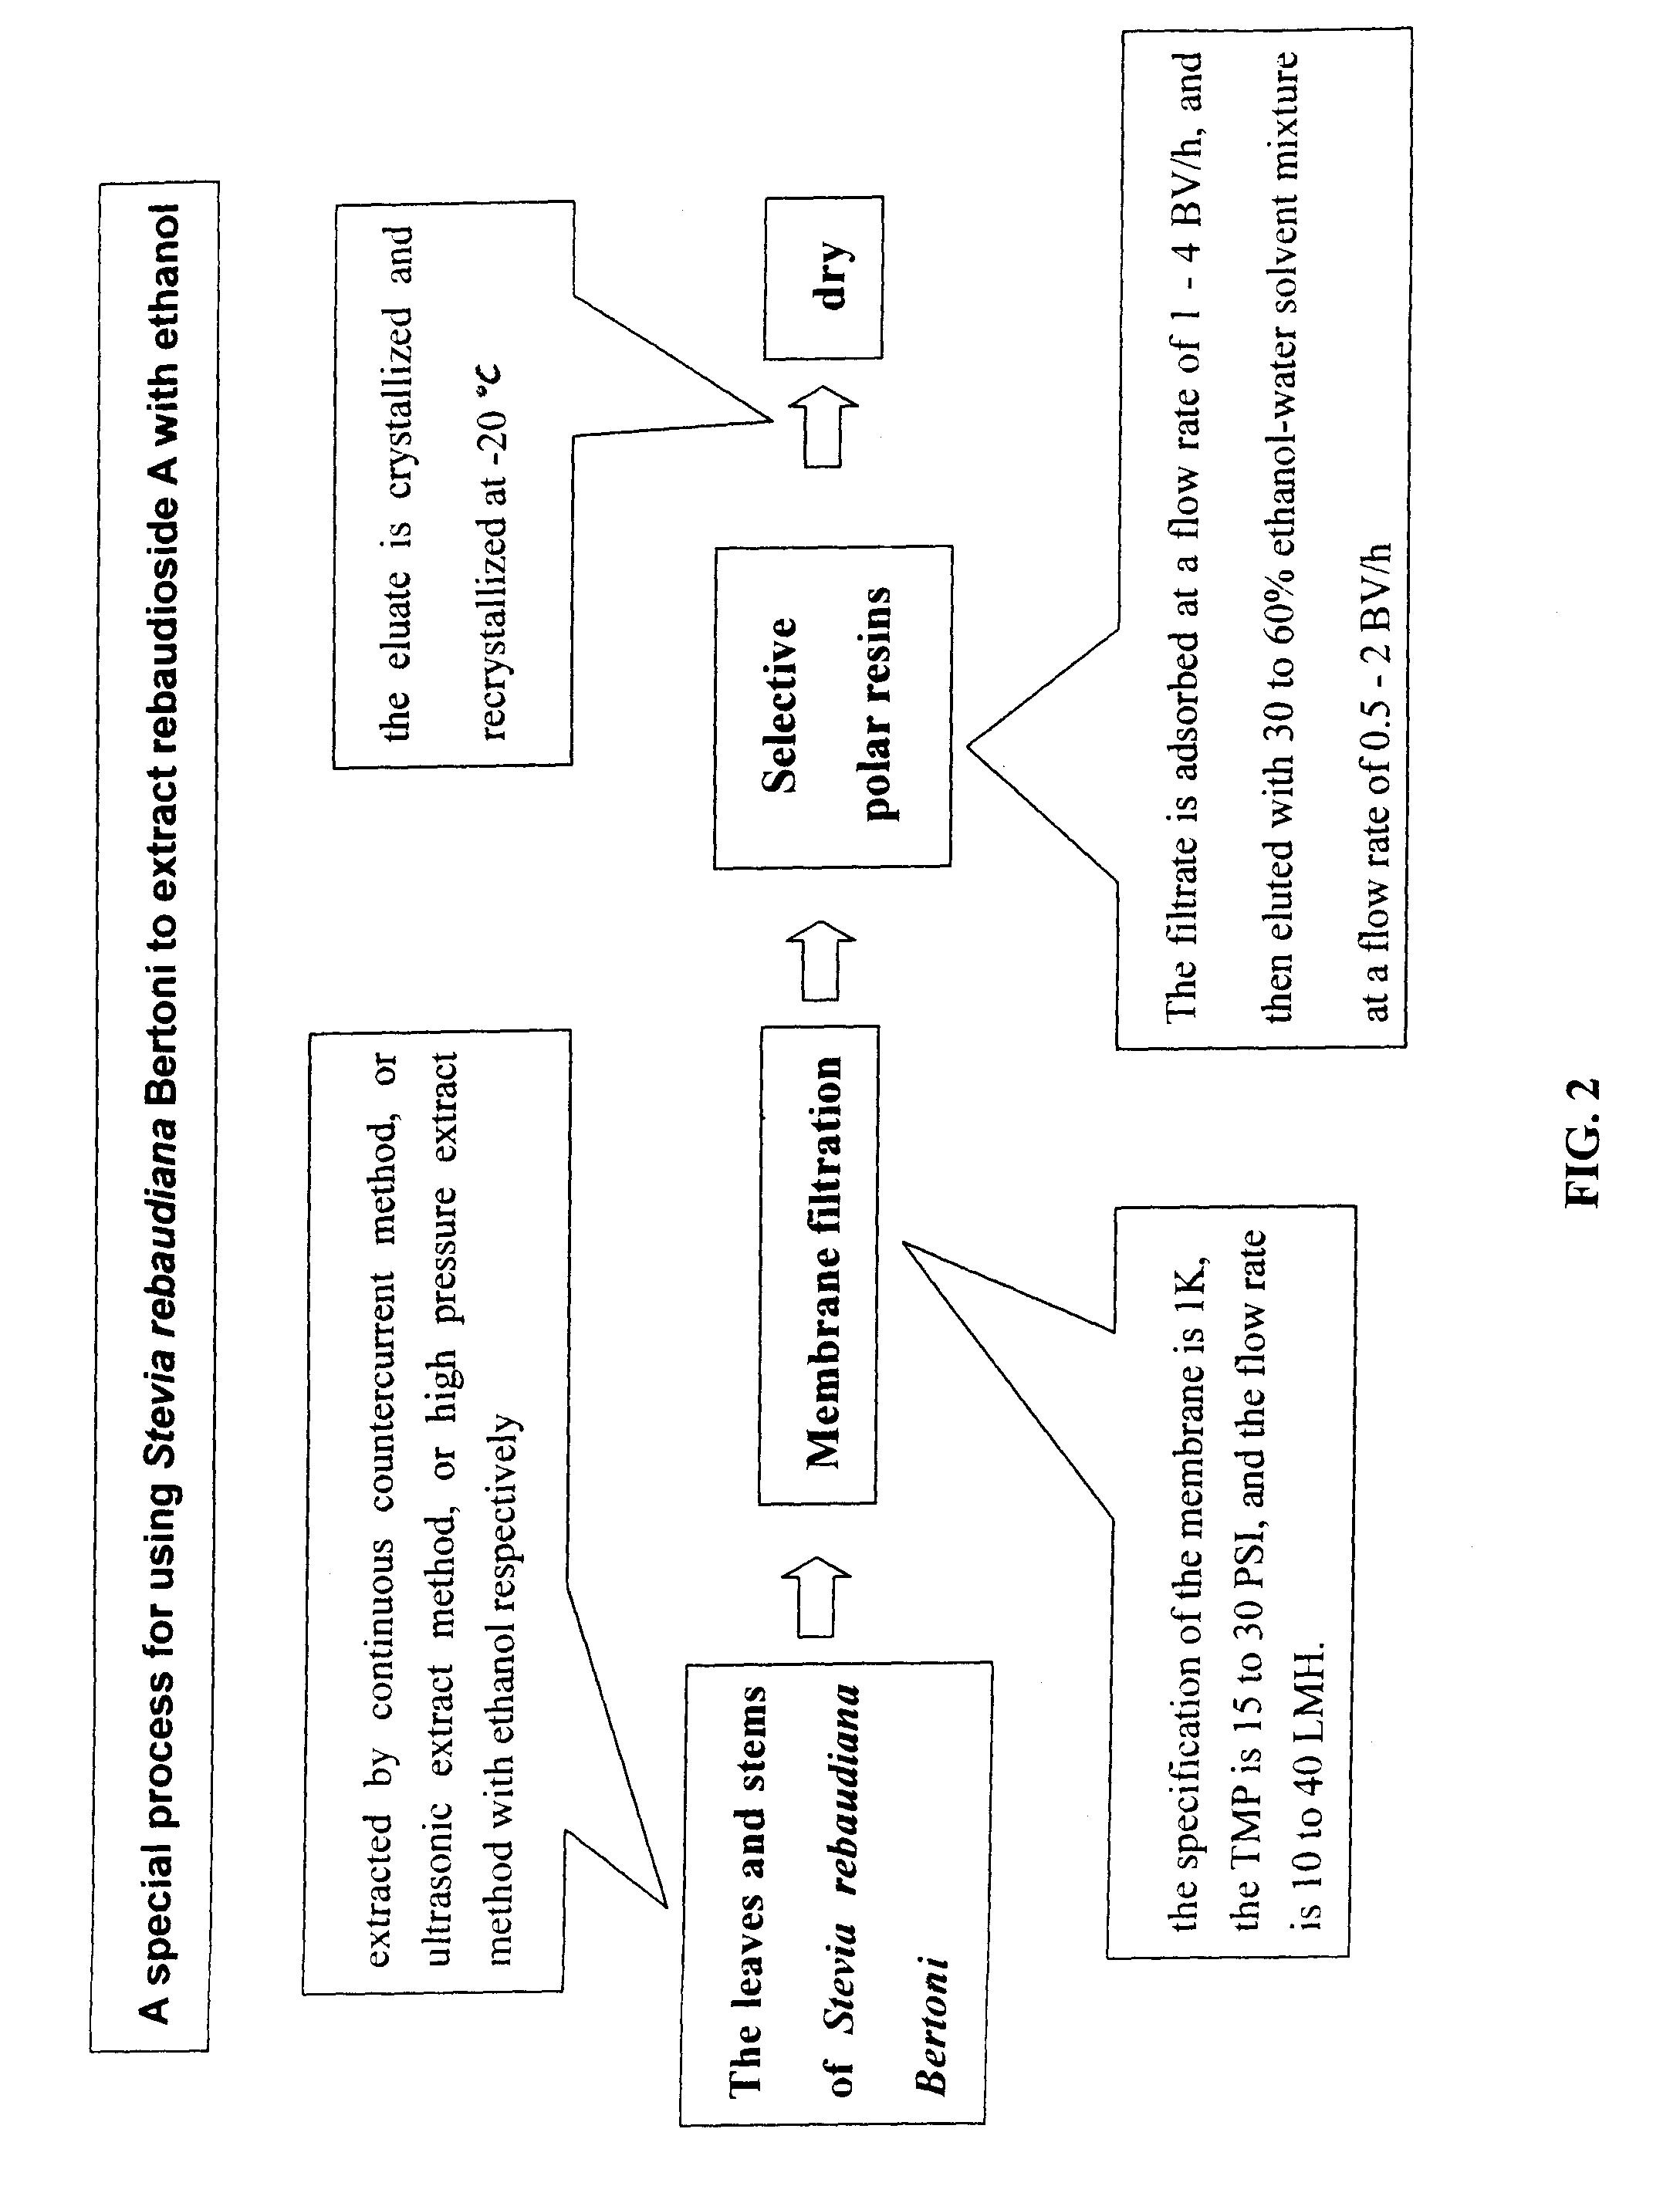 High-purity rebaudioside A and method of extracting same